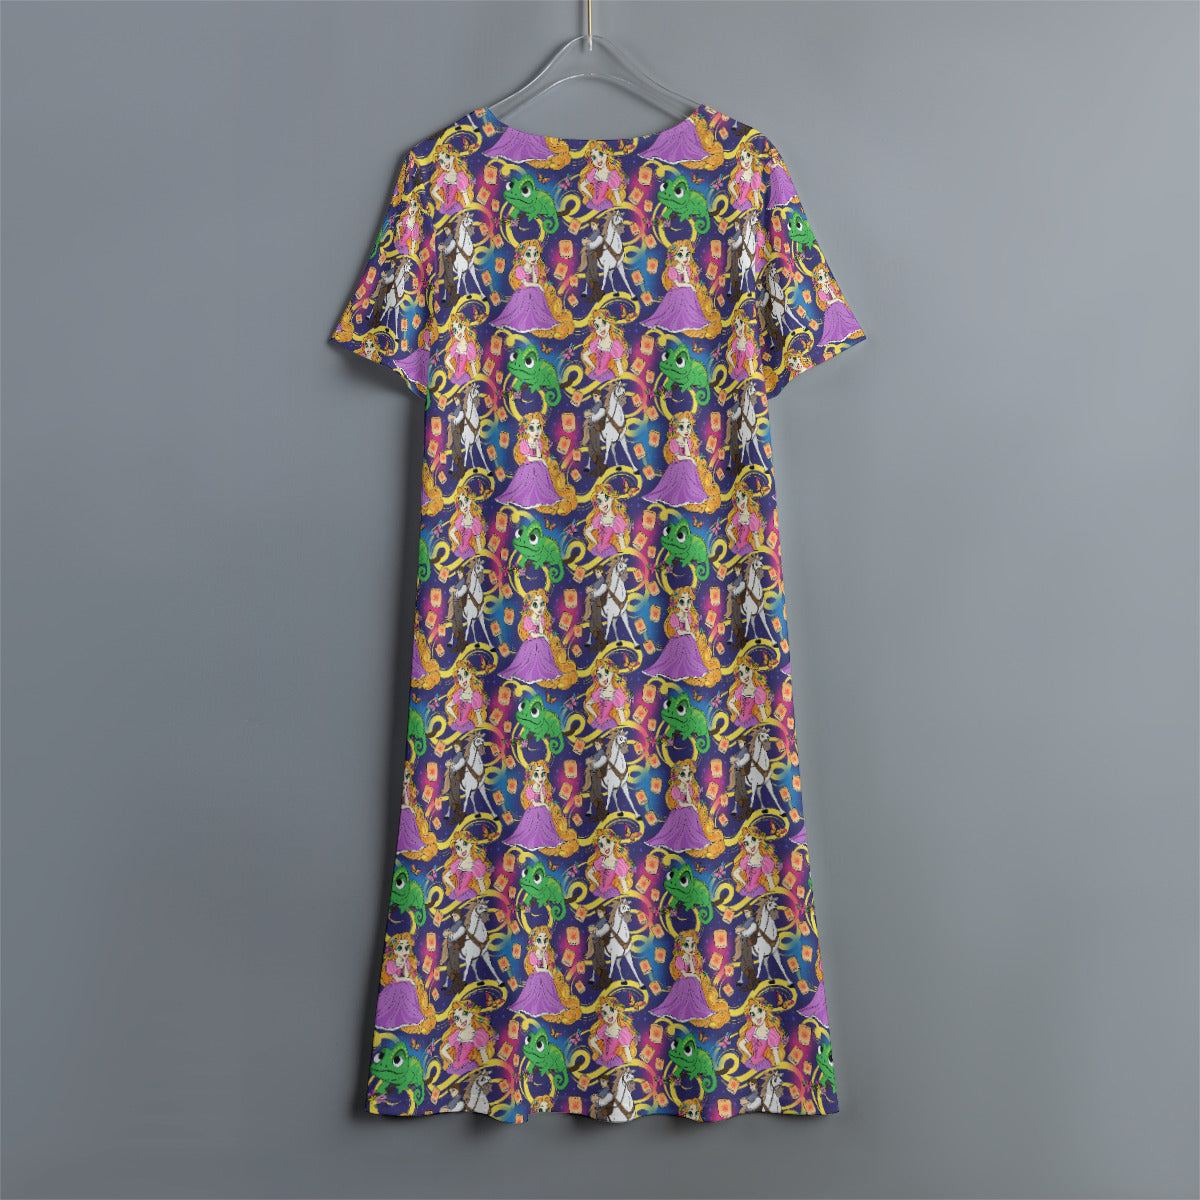 At Last I See The Light Women's Swing Dress With Short Sleeve